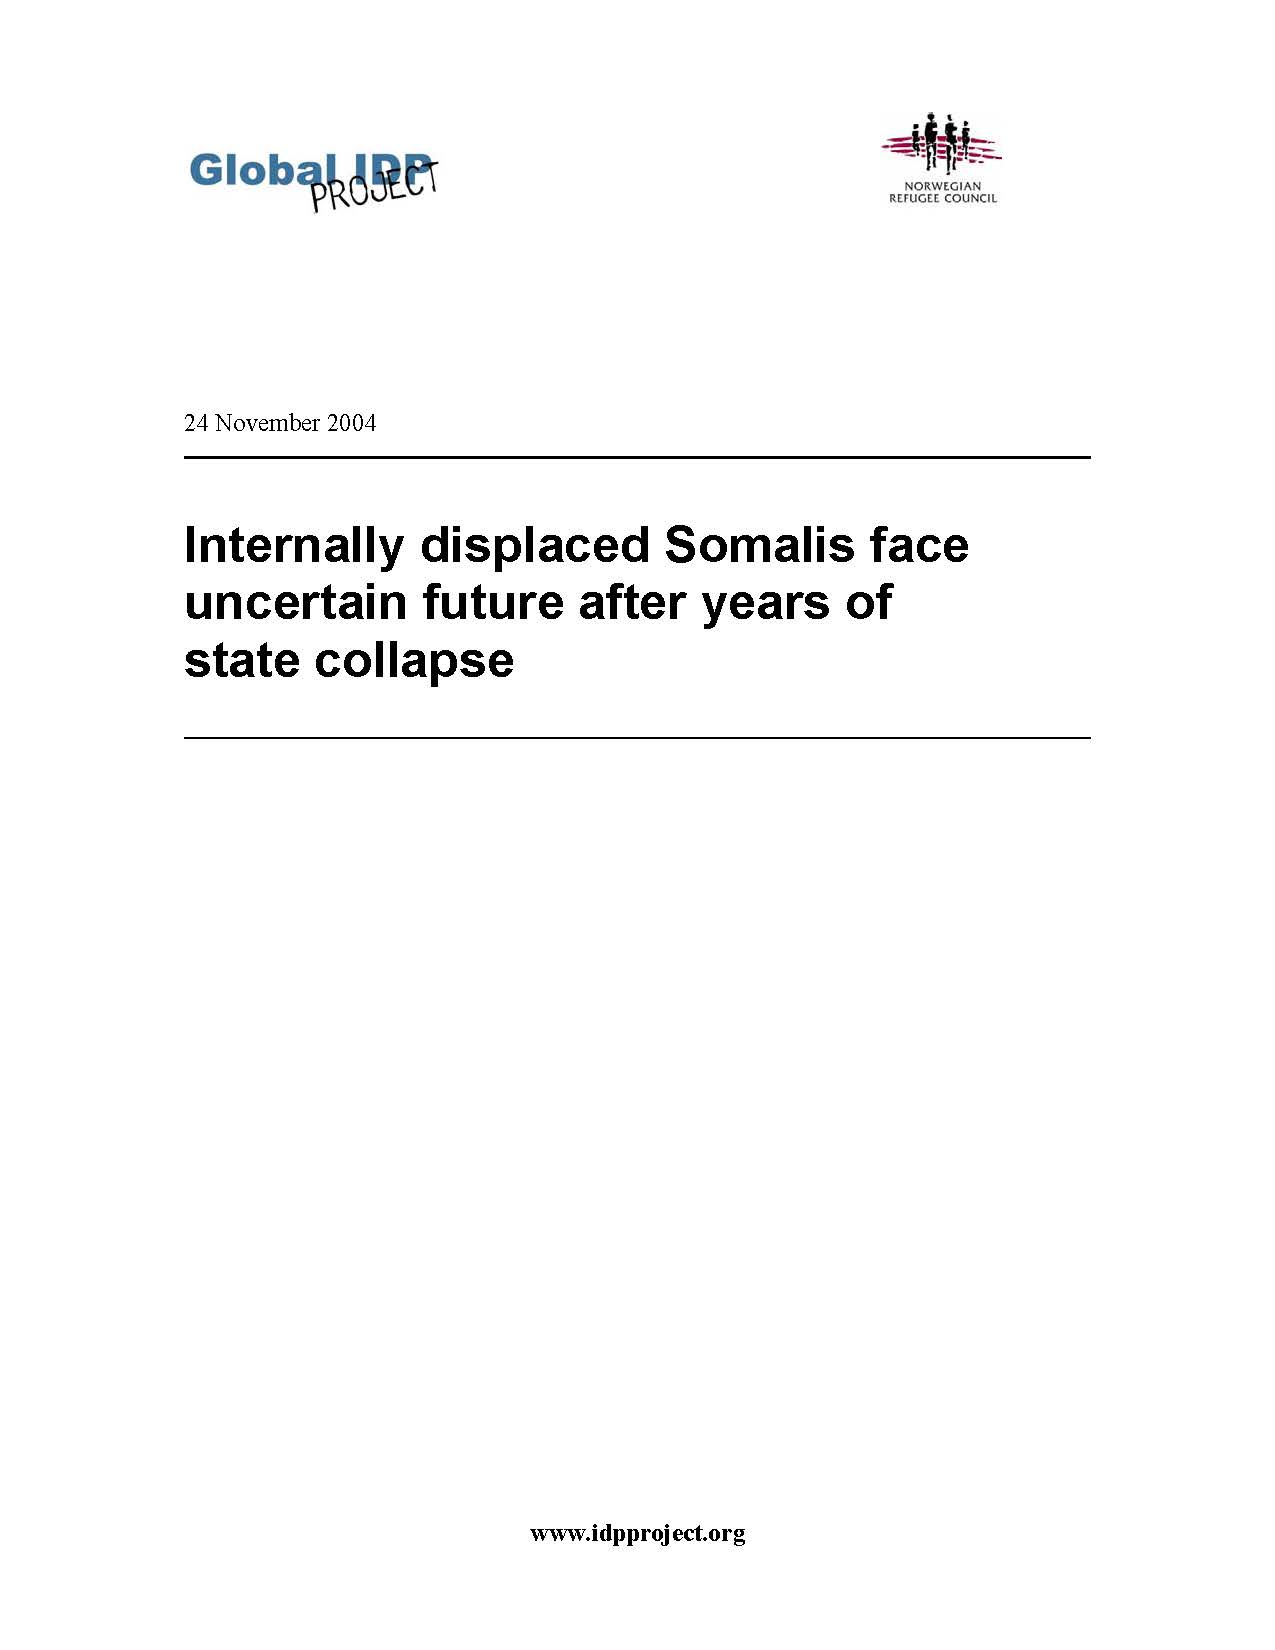 Internally displaced Somalis face uncertain future after years of state collapse